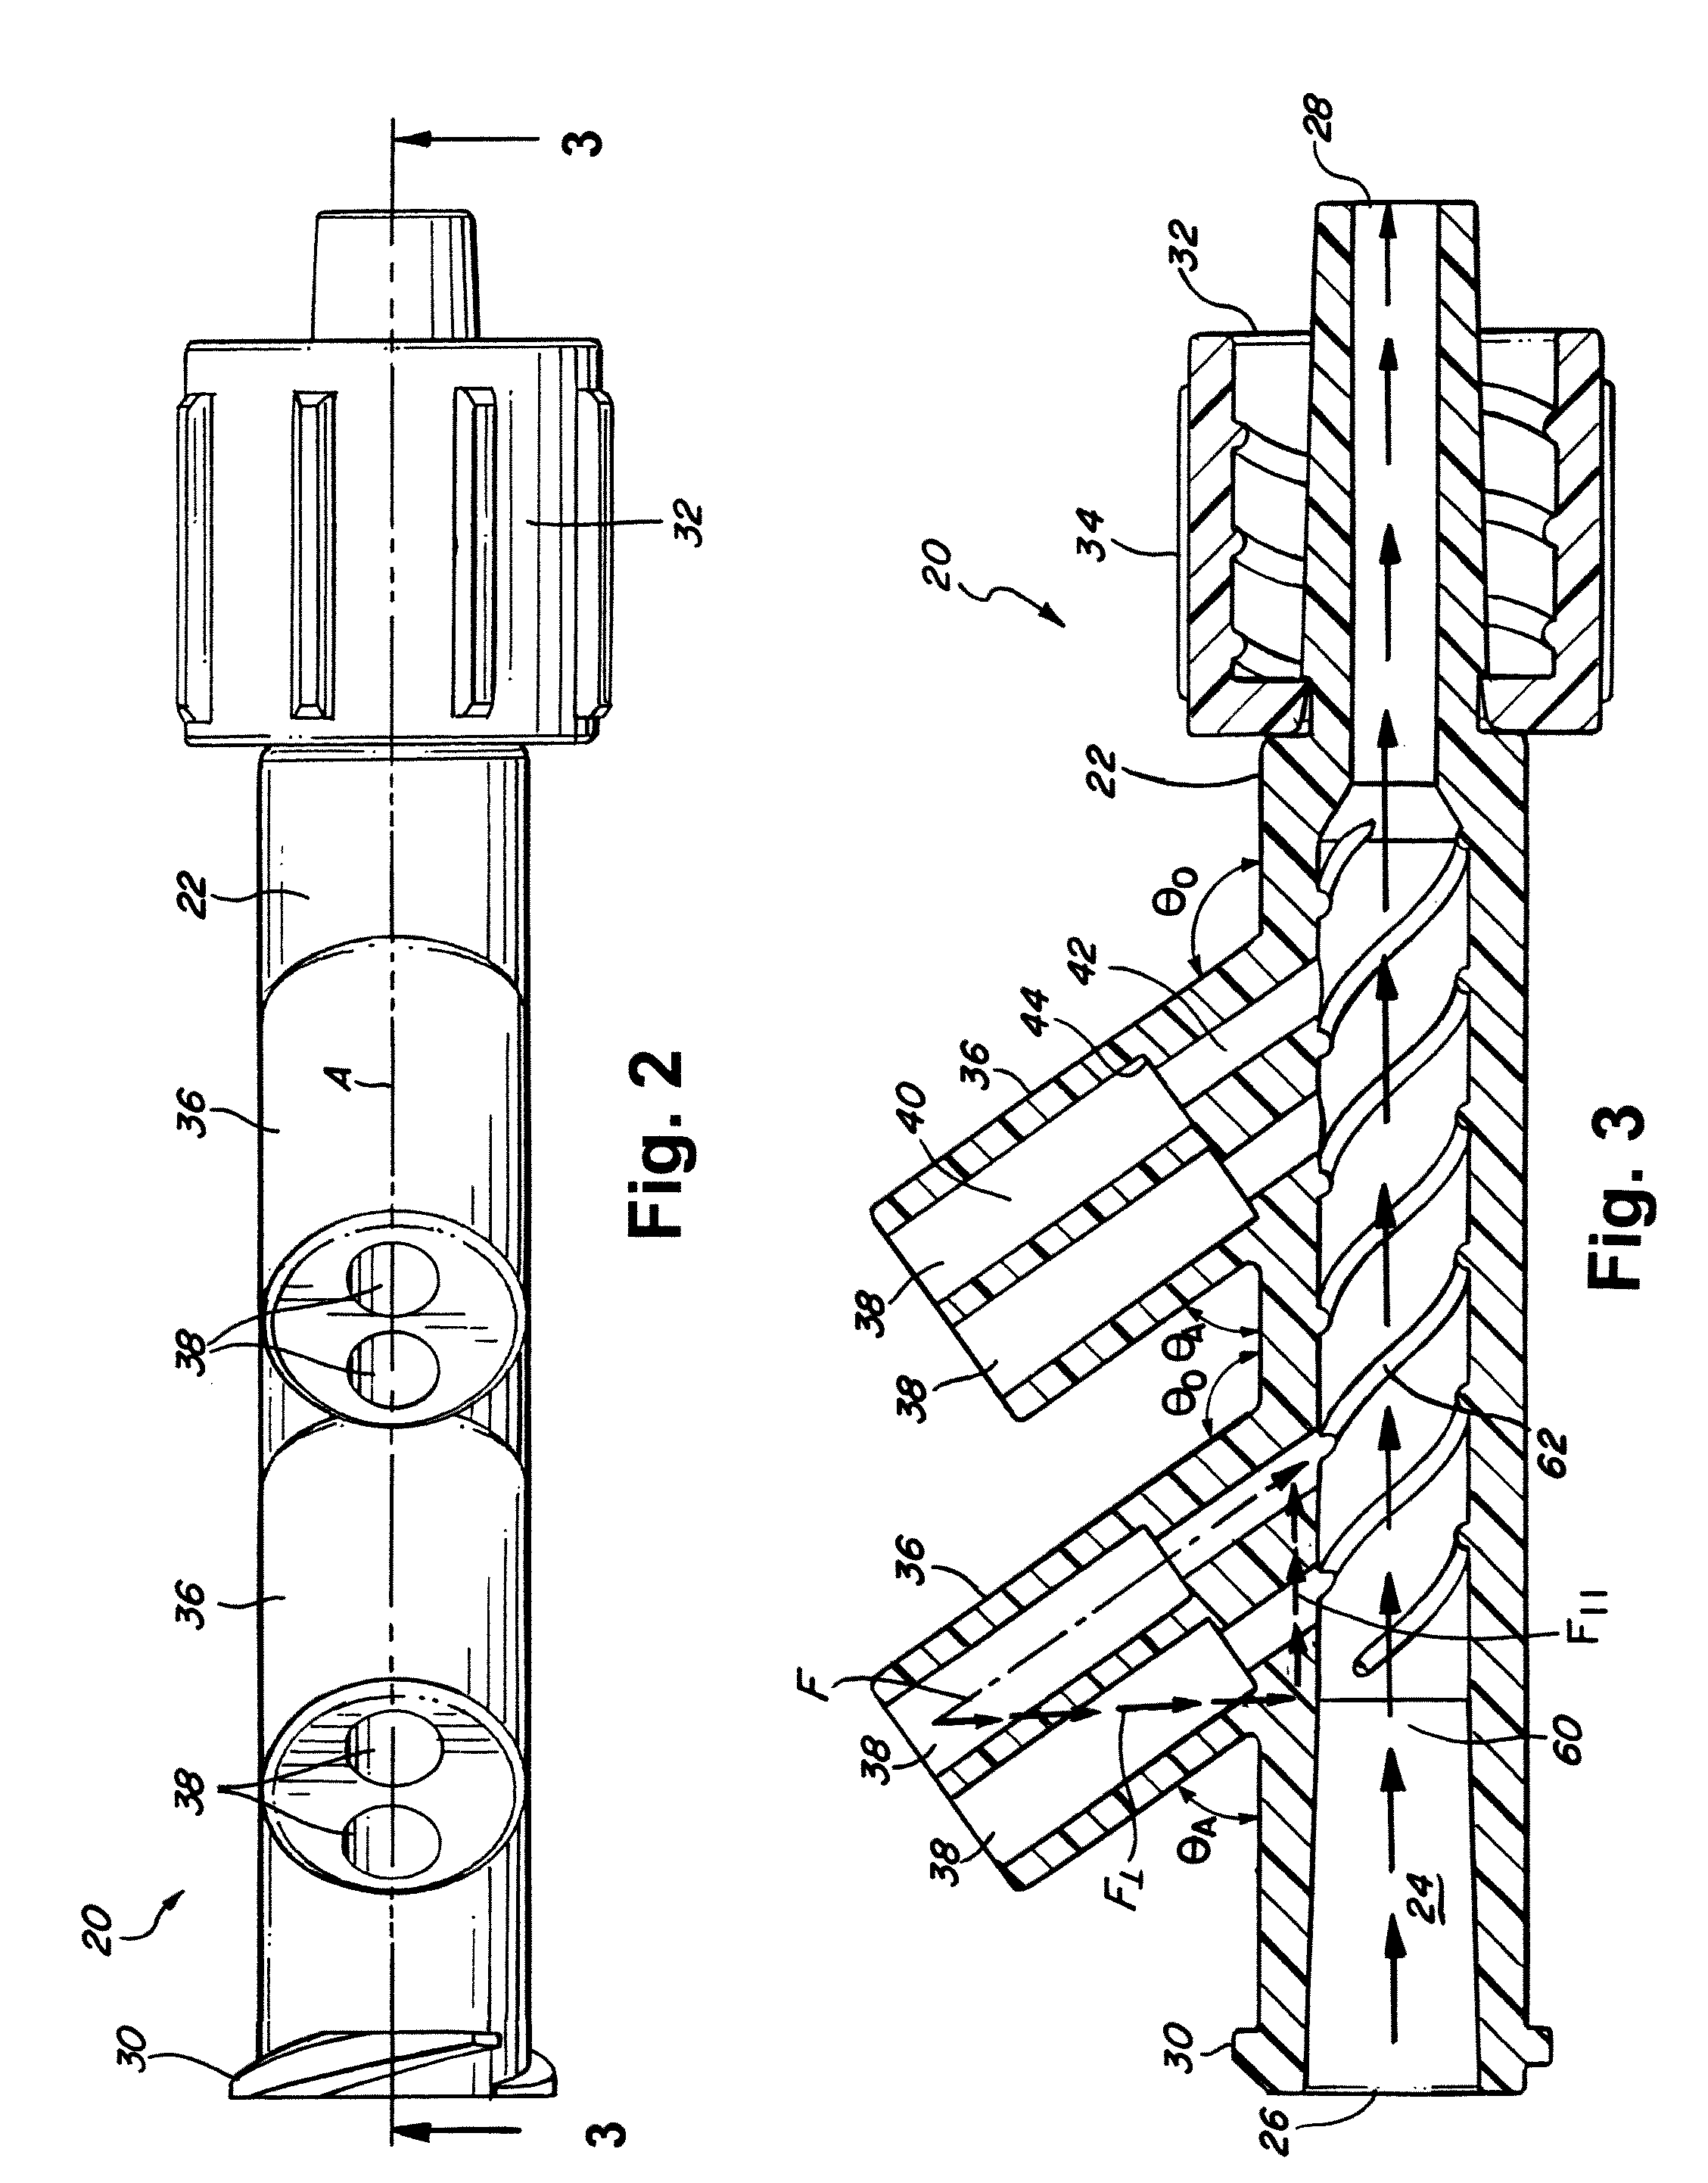 Multiple-line connective devices for infusing medication